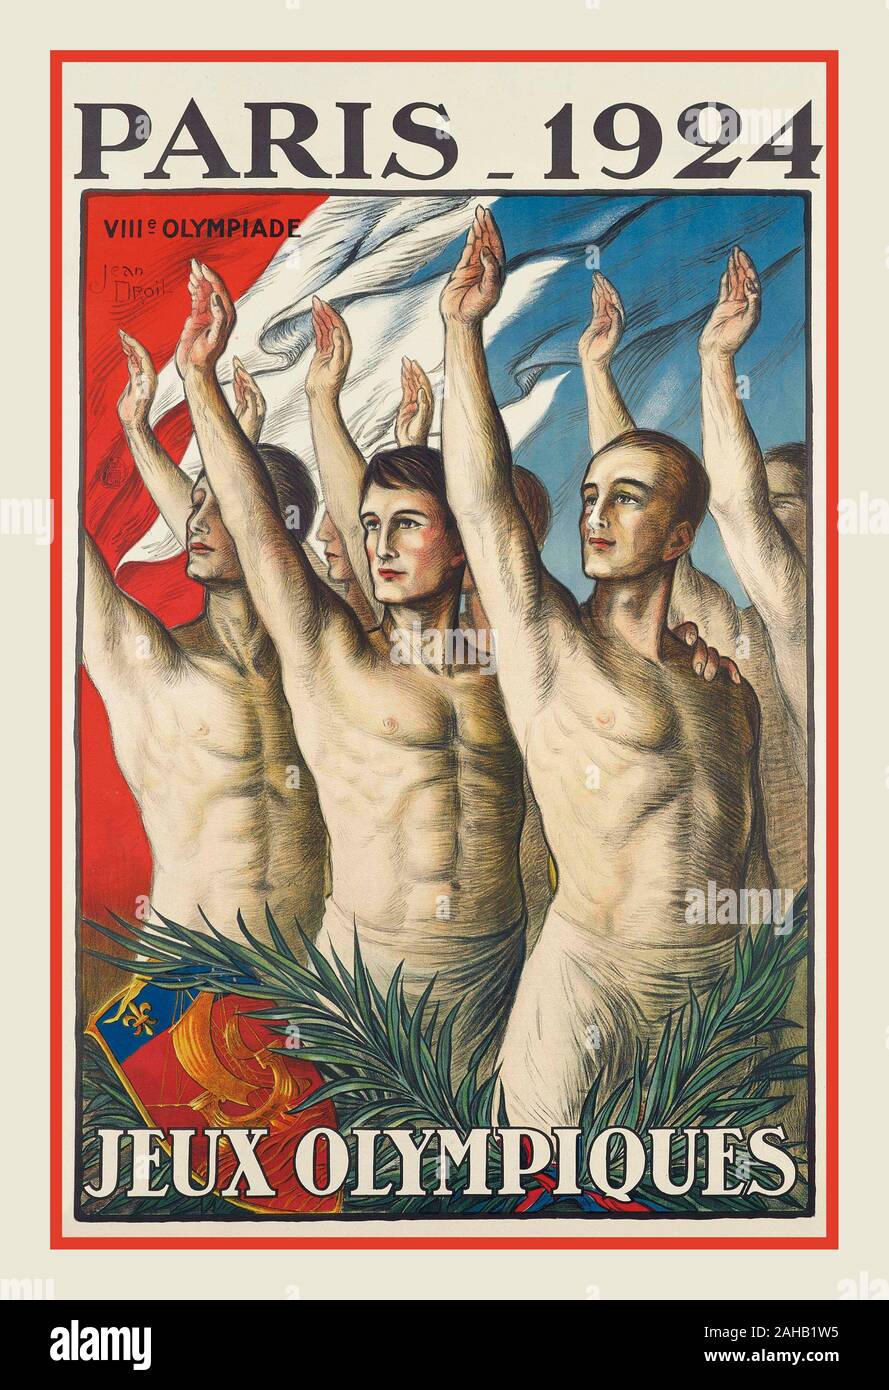 PARIS OLYMPICS 1924 OLYMPIADE VINTAGE PARIS 1924, Olympic Games poster JEUX OLYMPIQUES  lithograph in colours, 1924, printed by Hachard & Cie., Paris, Stock Photo